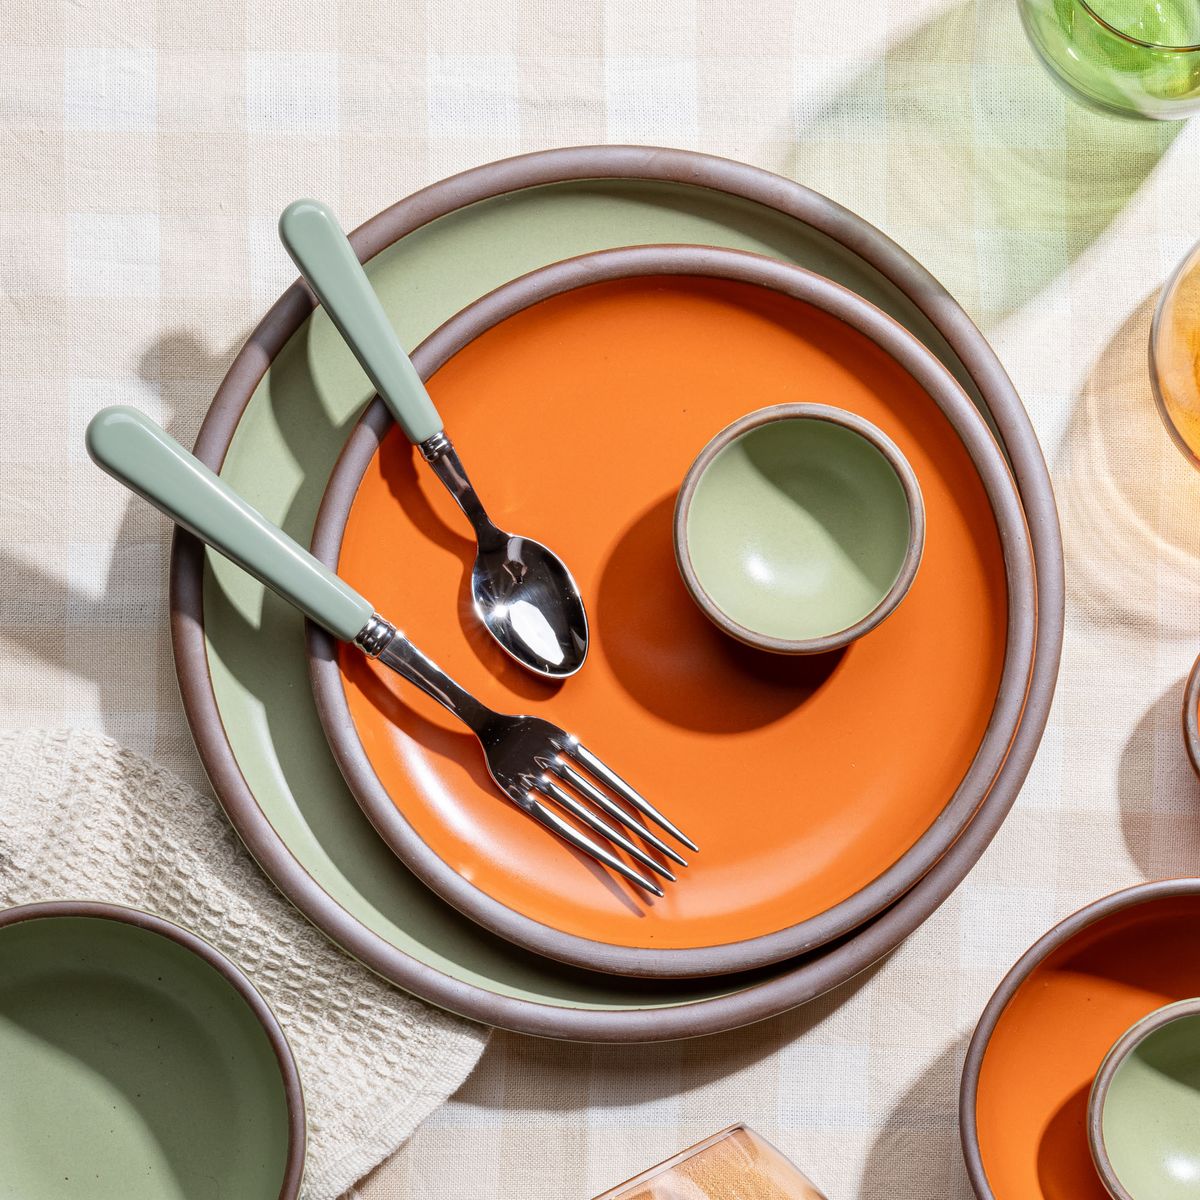 A place setting featuring 2 ceramic plates in orange and sage green with a matching green handled fork and spoon.